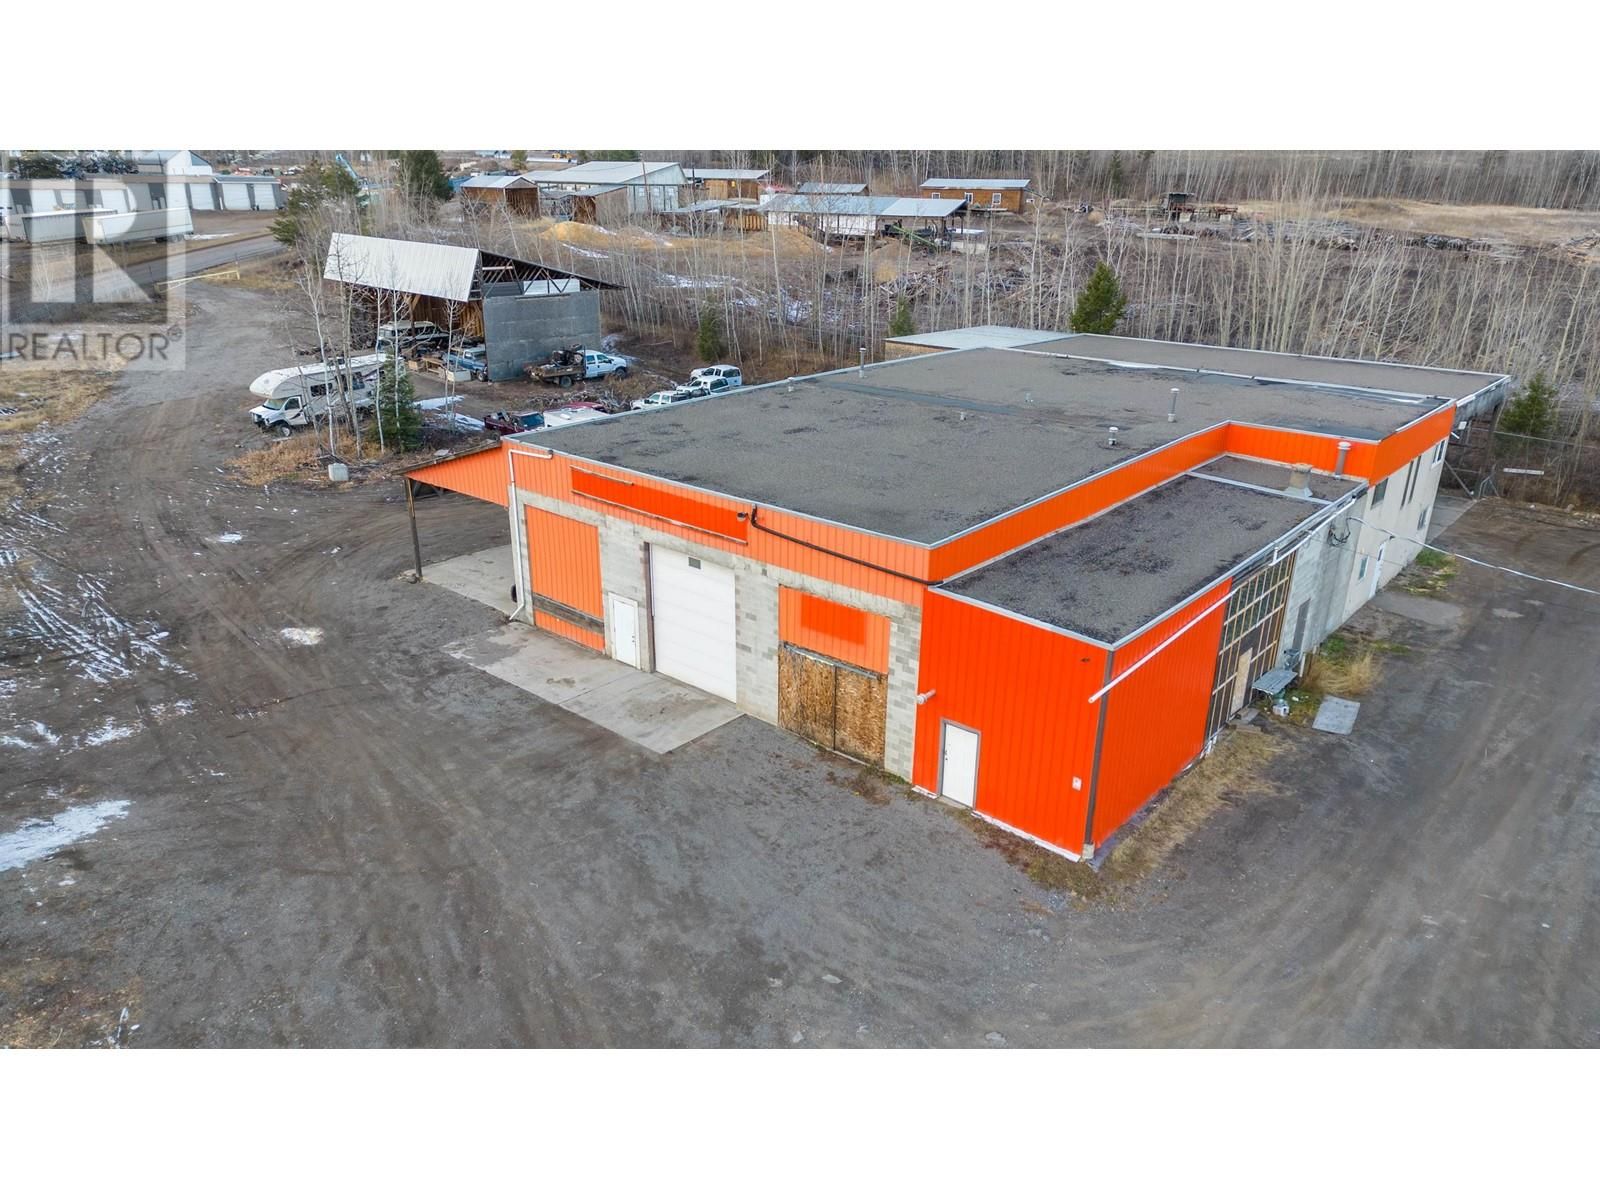 Main Photo: 850 EXETER STATION ROAD in 100 Mile House: Industrial for sale : MLS®# C8055783